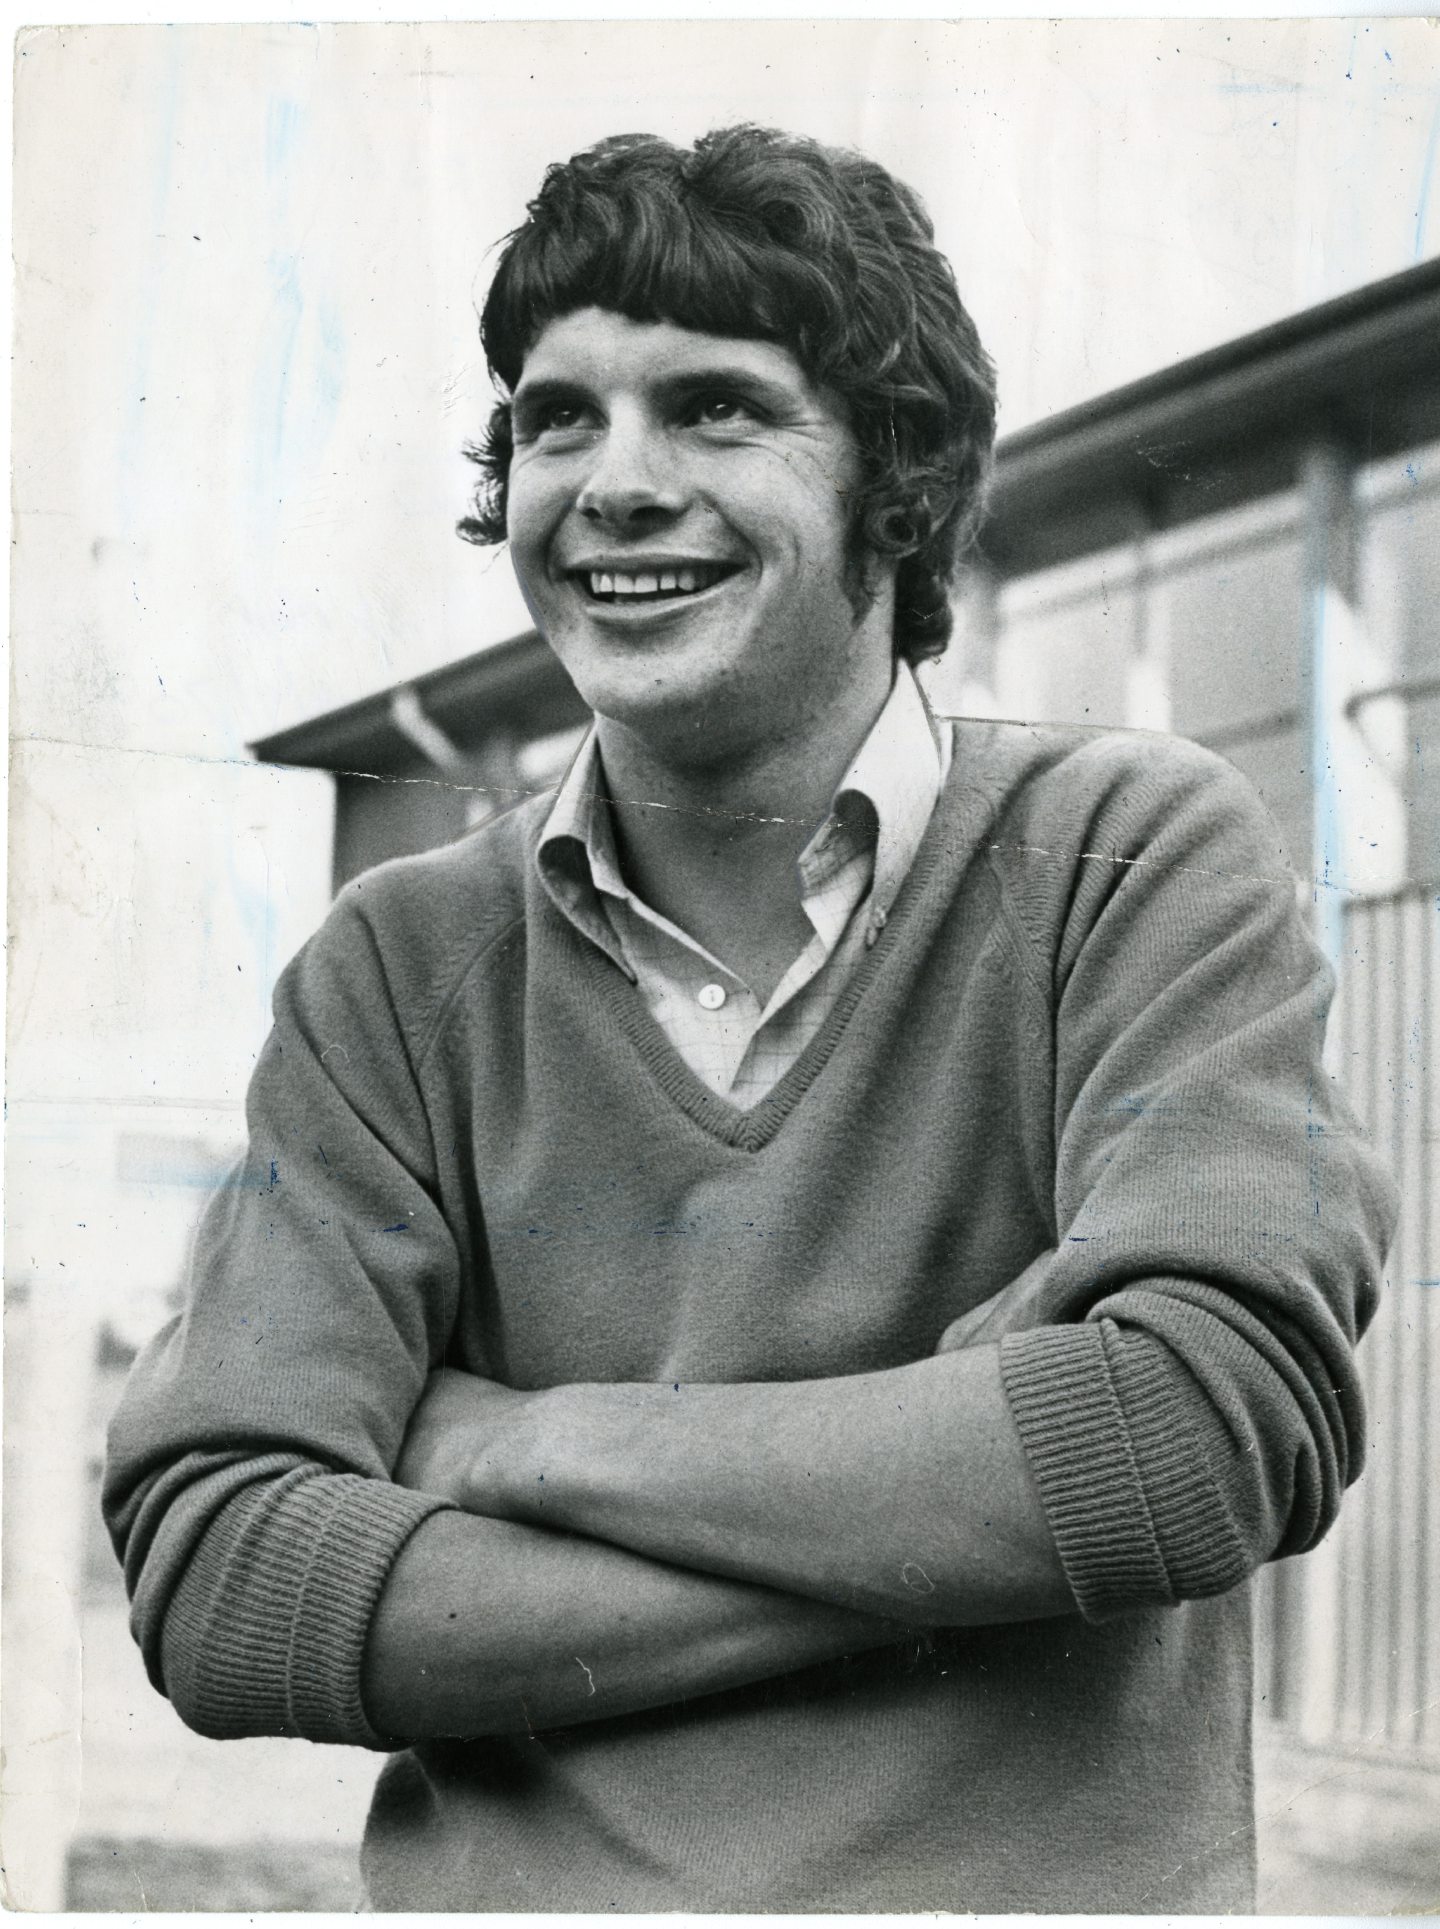 Johnstone after being called up to the Rangers first team for the 1970/71 season. Image: DC Thomson.